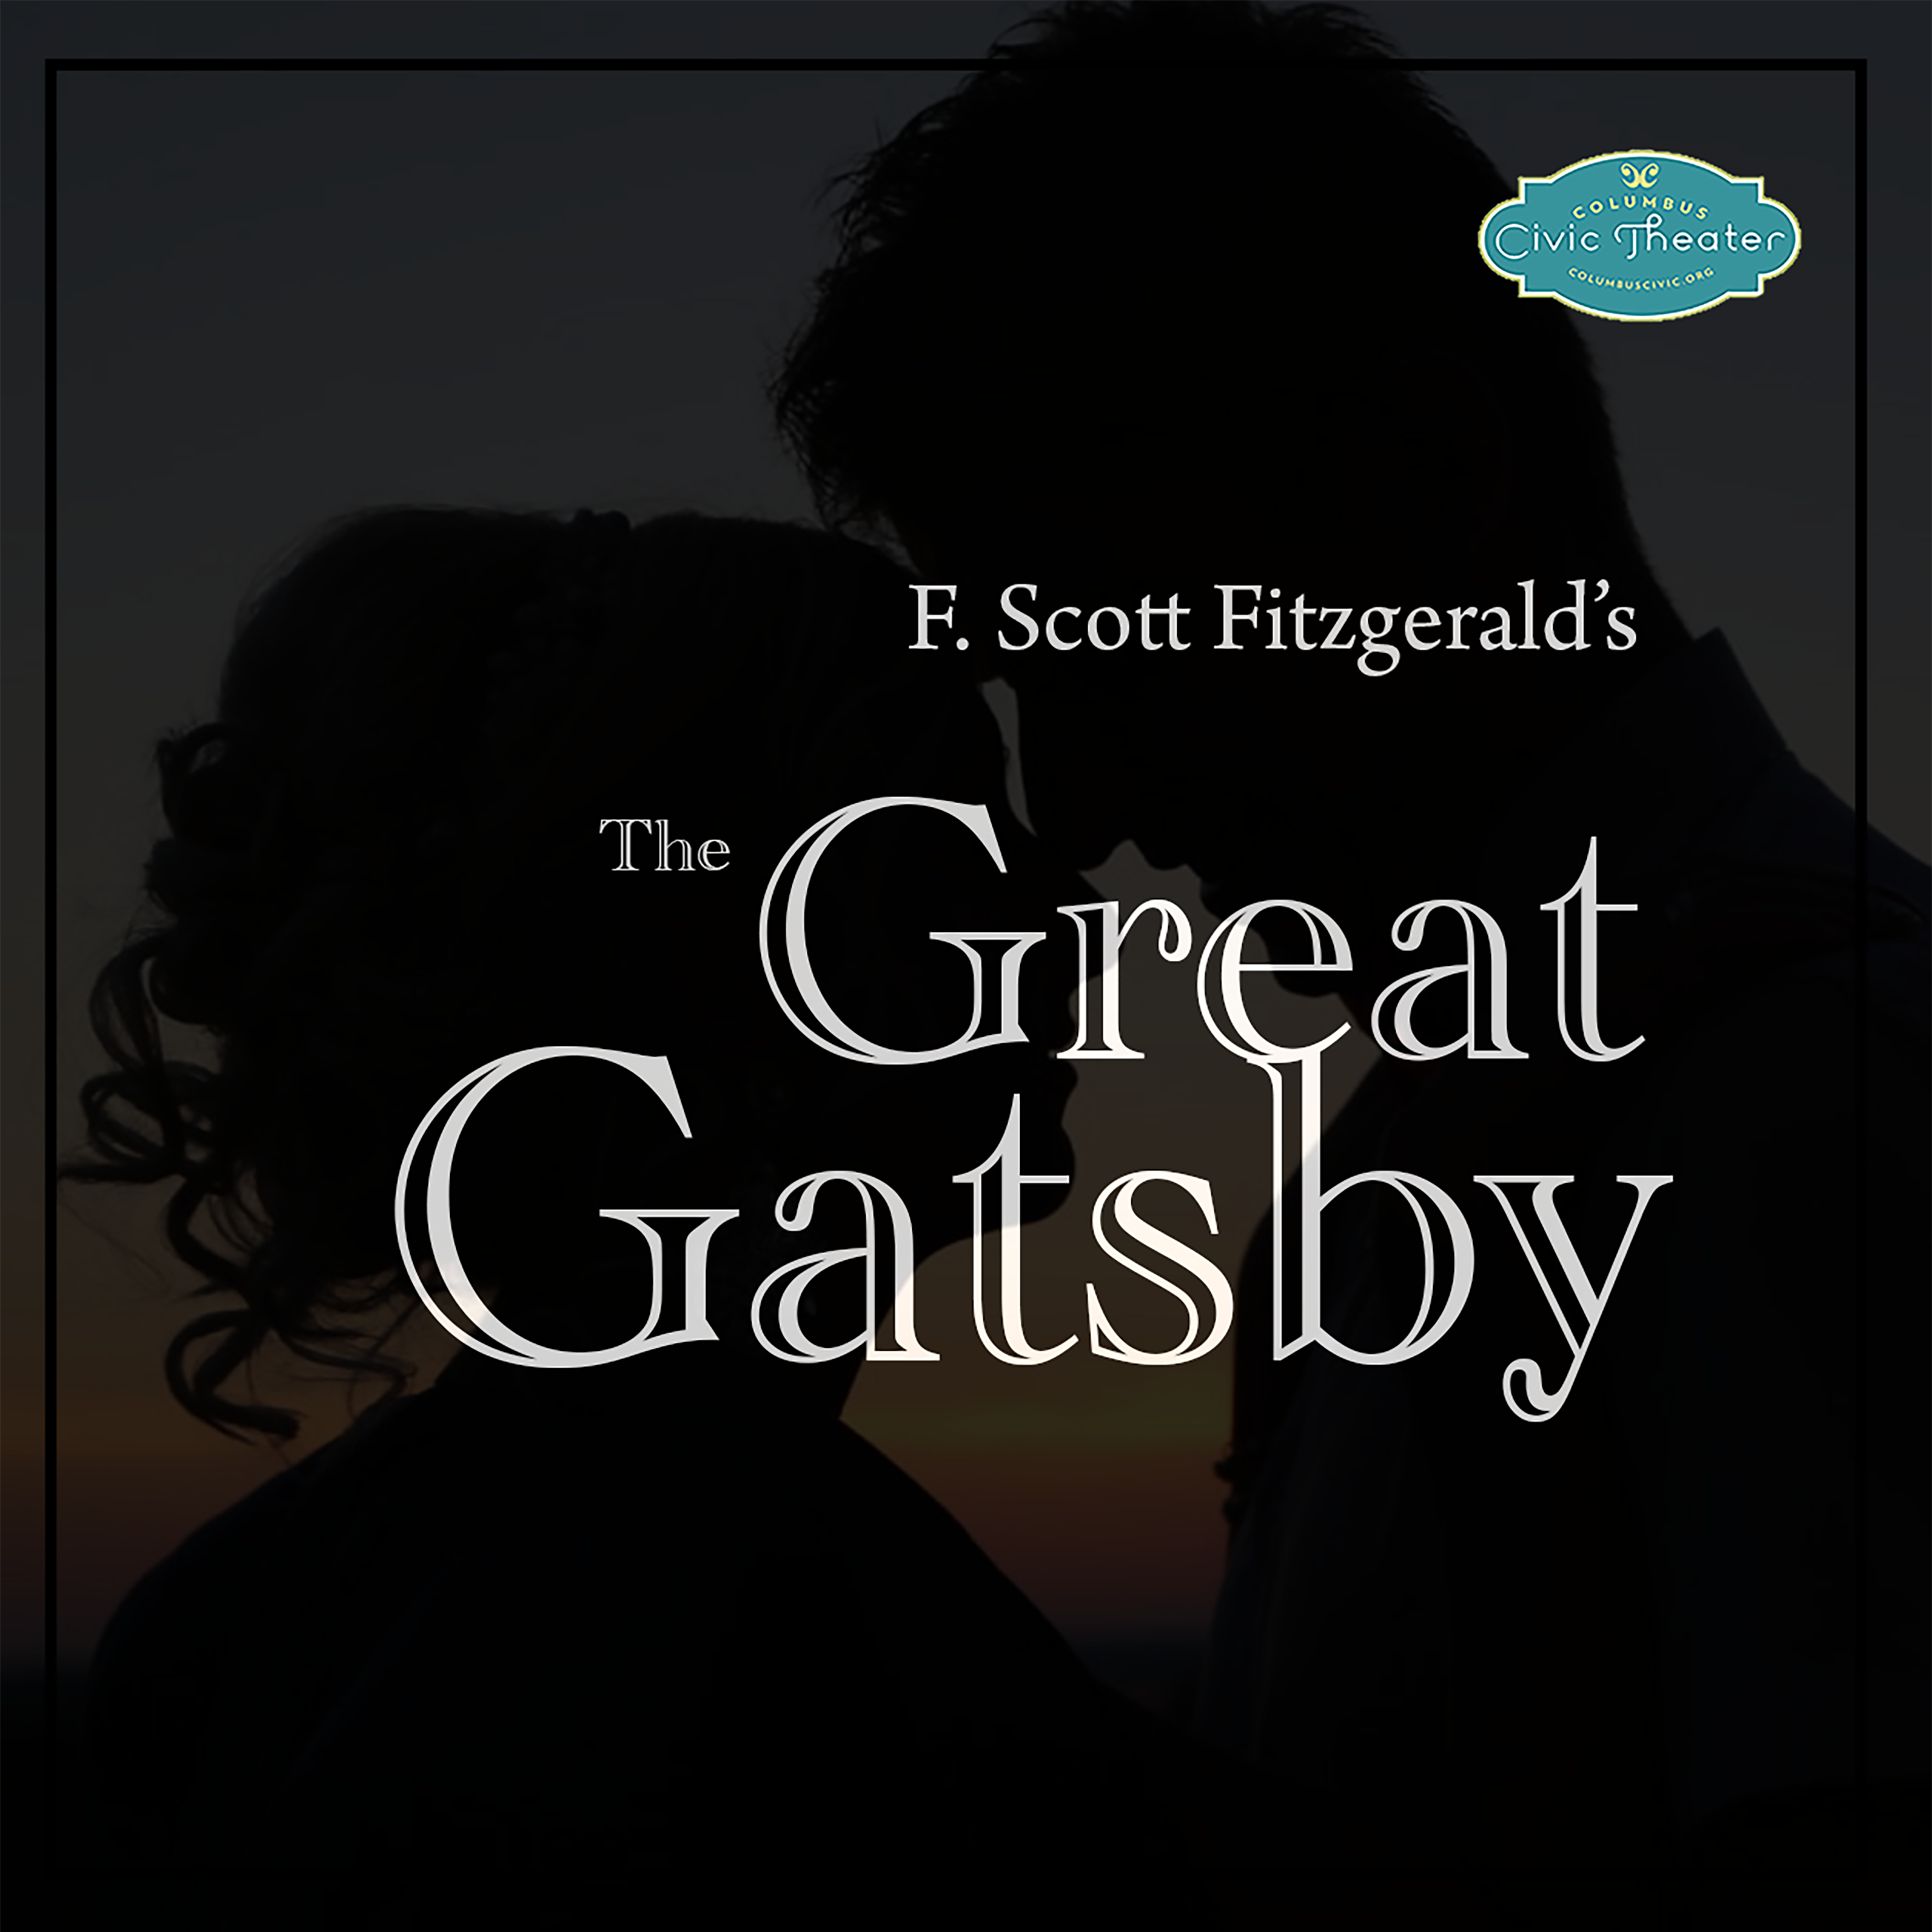 Artwork for podcast F. Scott Fitzgerald's The Great Gatsby